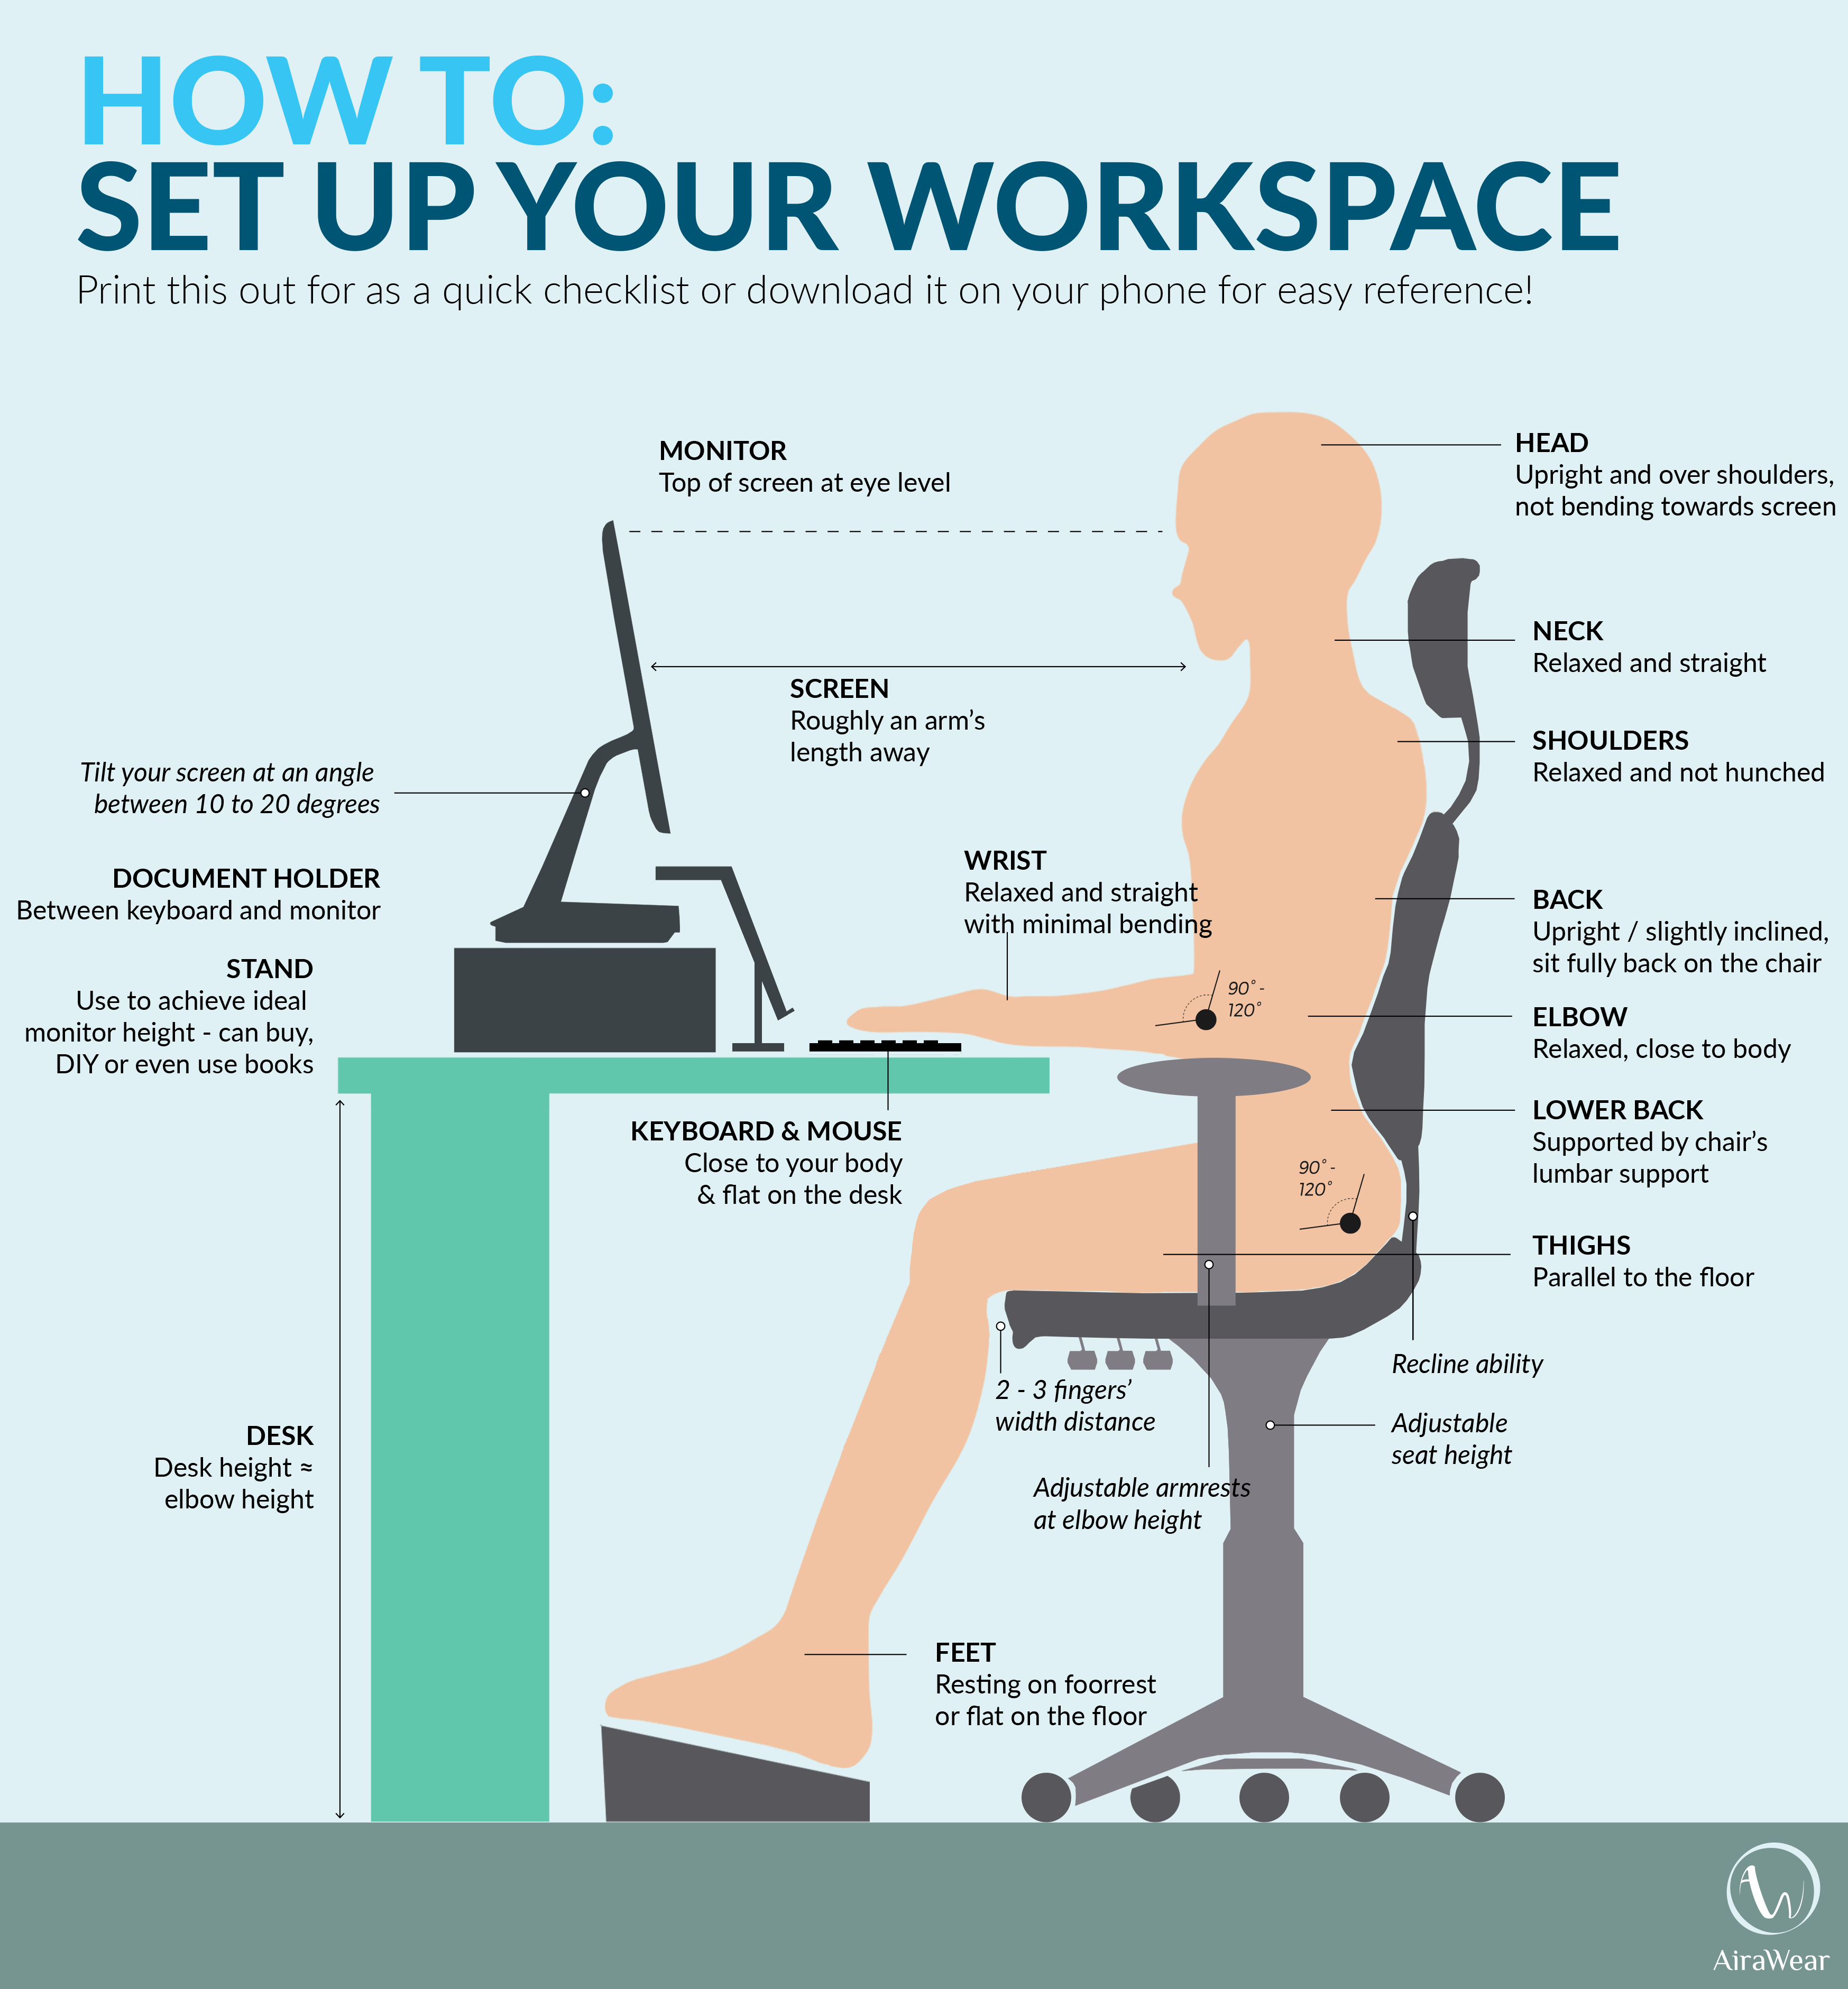 Ergonomic desk, chair, and computer setup to avoid neck pain